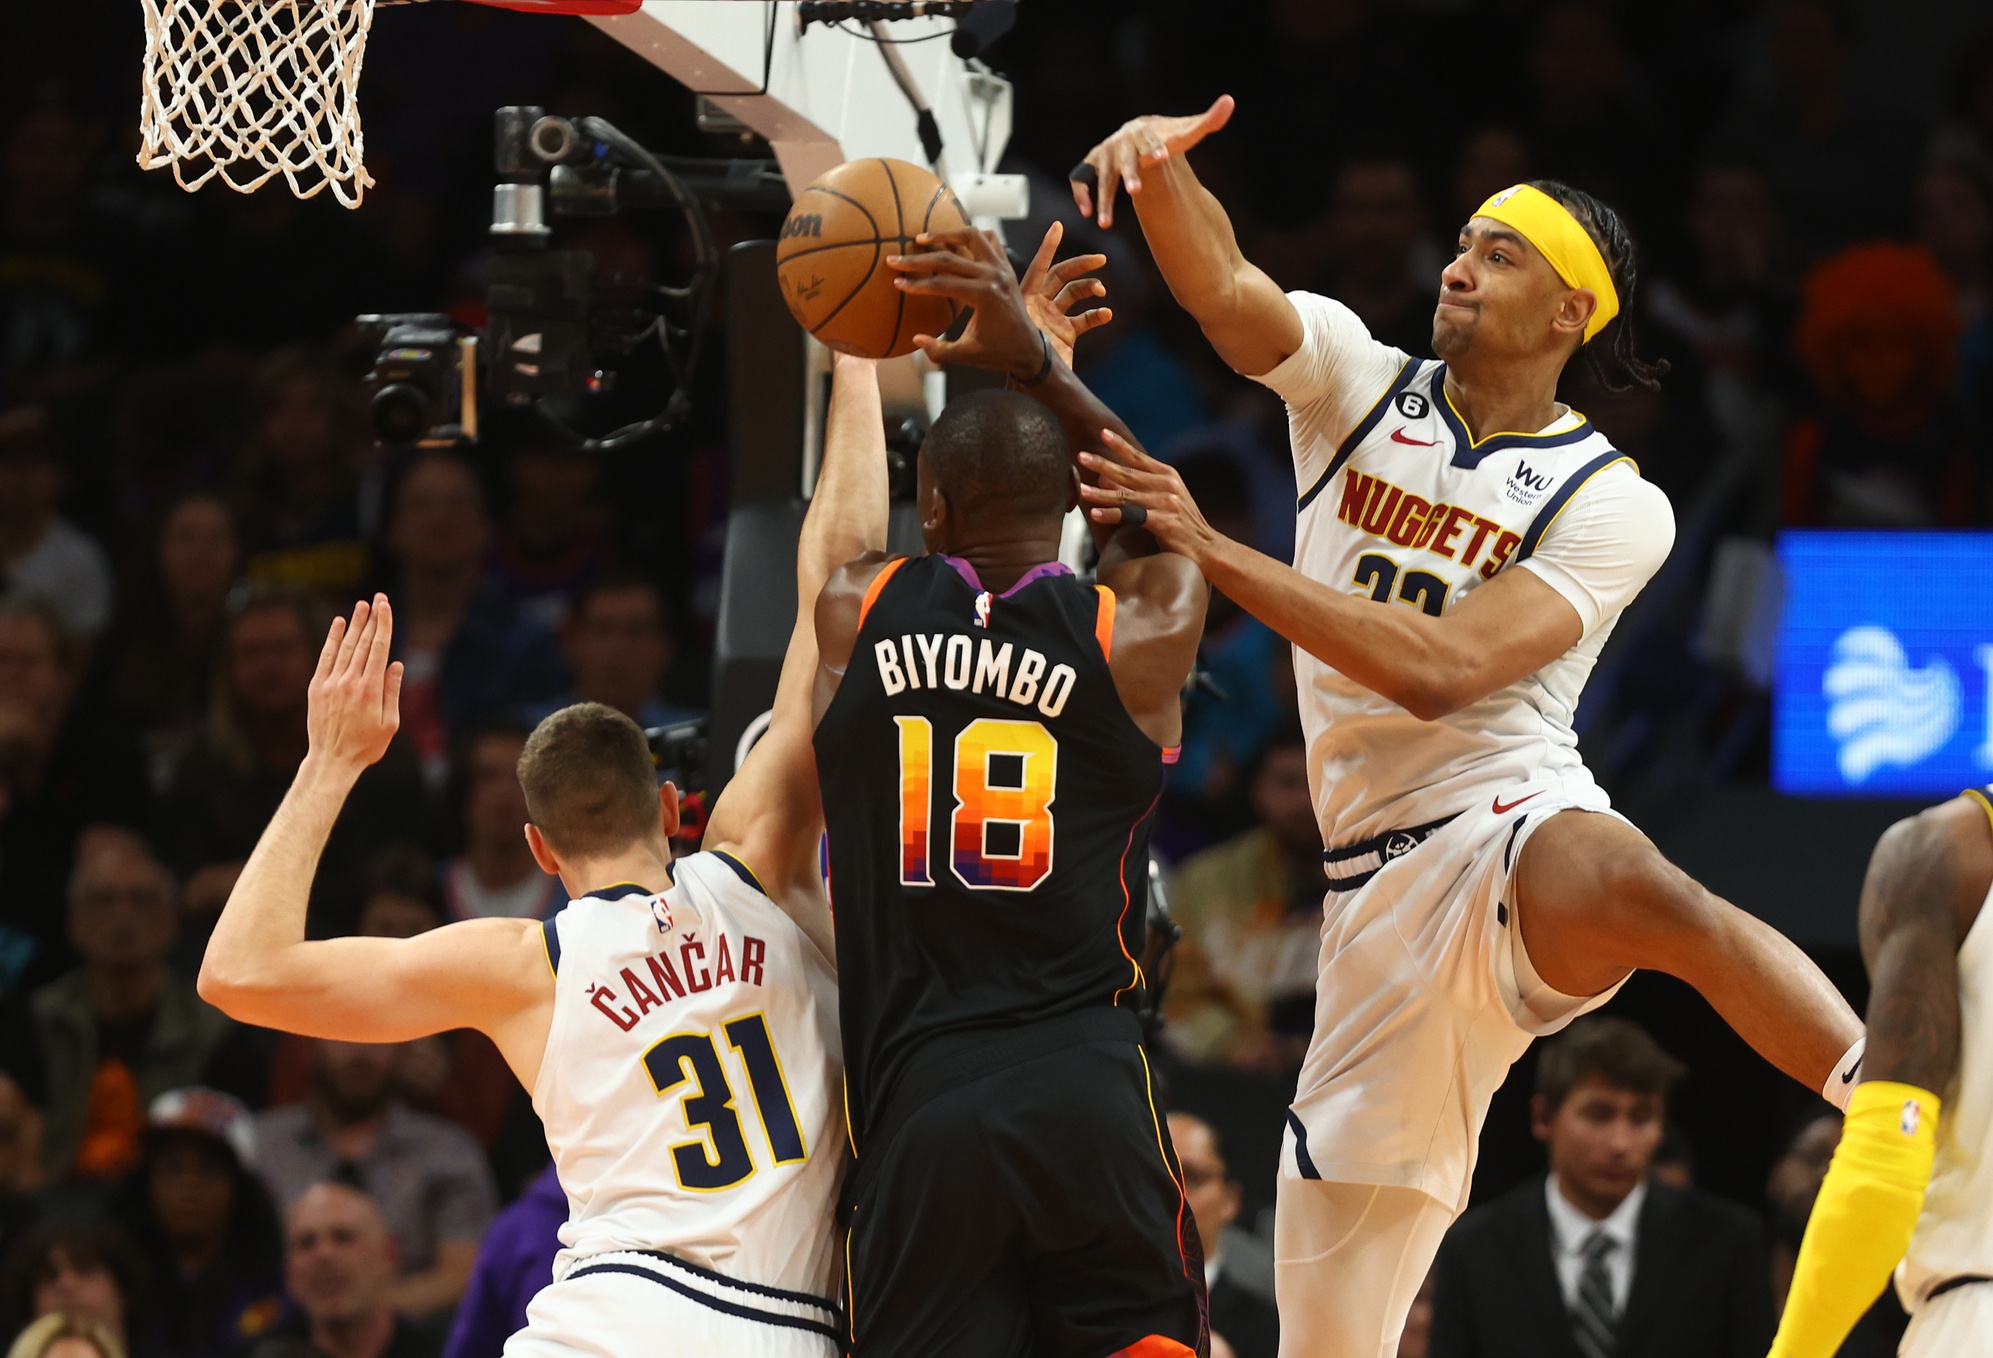 Apr 6, 2023; Phoenix, Arizona, USA; Phoenix Suns center Bismack Biyombo (18) drives to the basket under pressure from Denver Nuggets forward Zeke Nnaji (22) and Vlatko Cancar (31) in the second half at Footprint Center. Mandatory Credit: Mark J. Rebilas-USA TODAY Sports. Bismack is a potential target for the LA Lakers